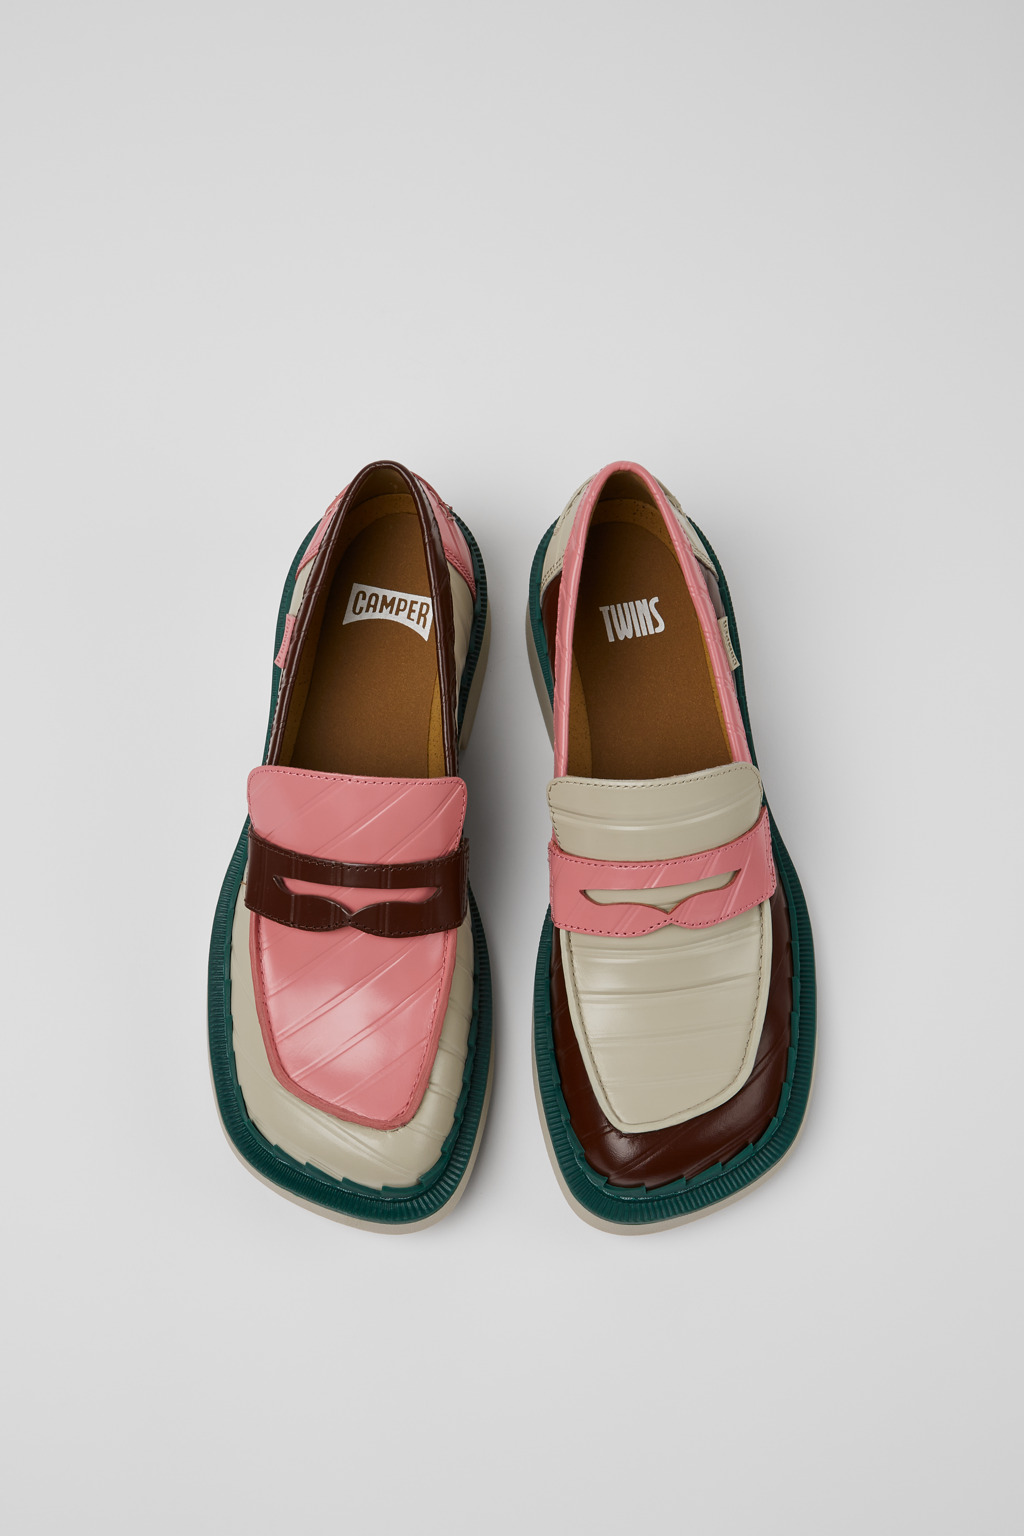 Twins Multicolor Loafers for Women - Fall/Winter collection - Camper